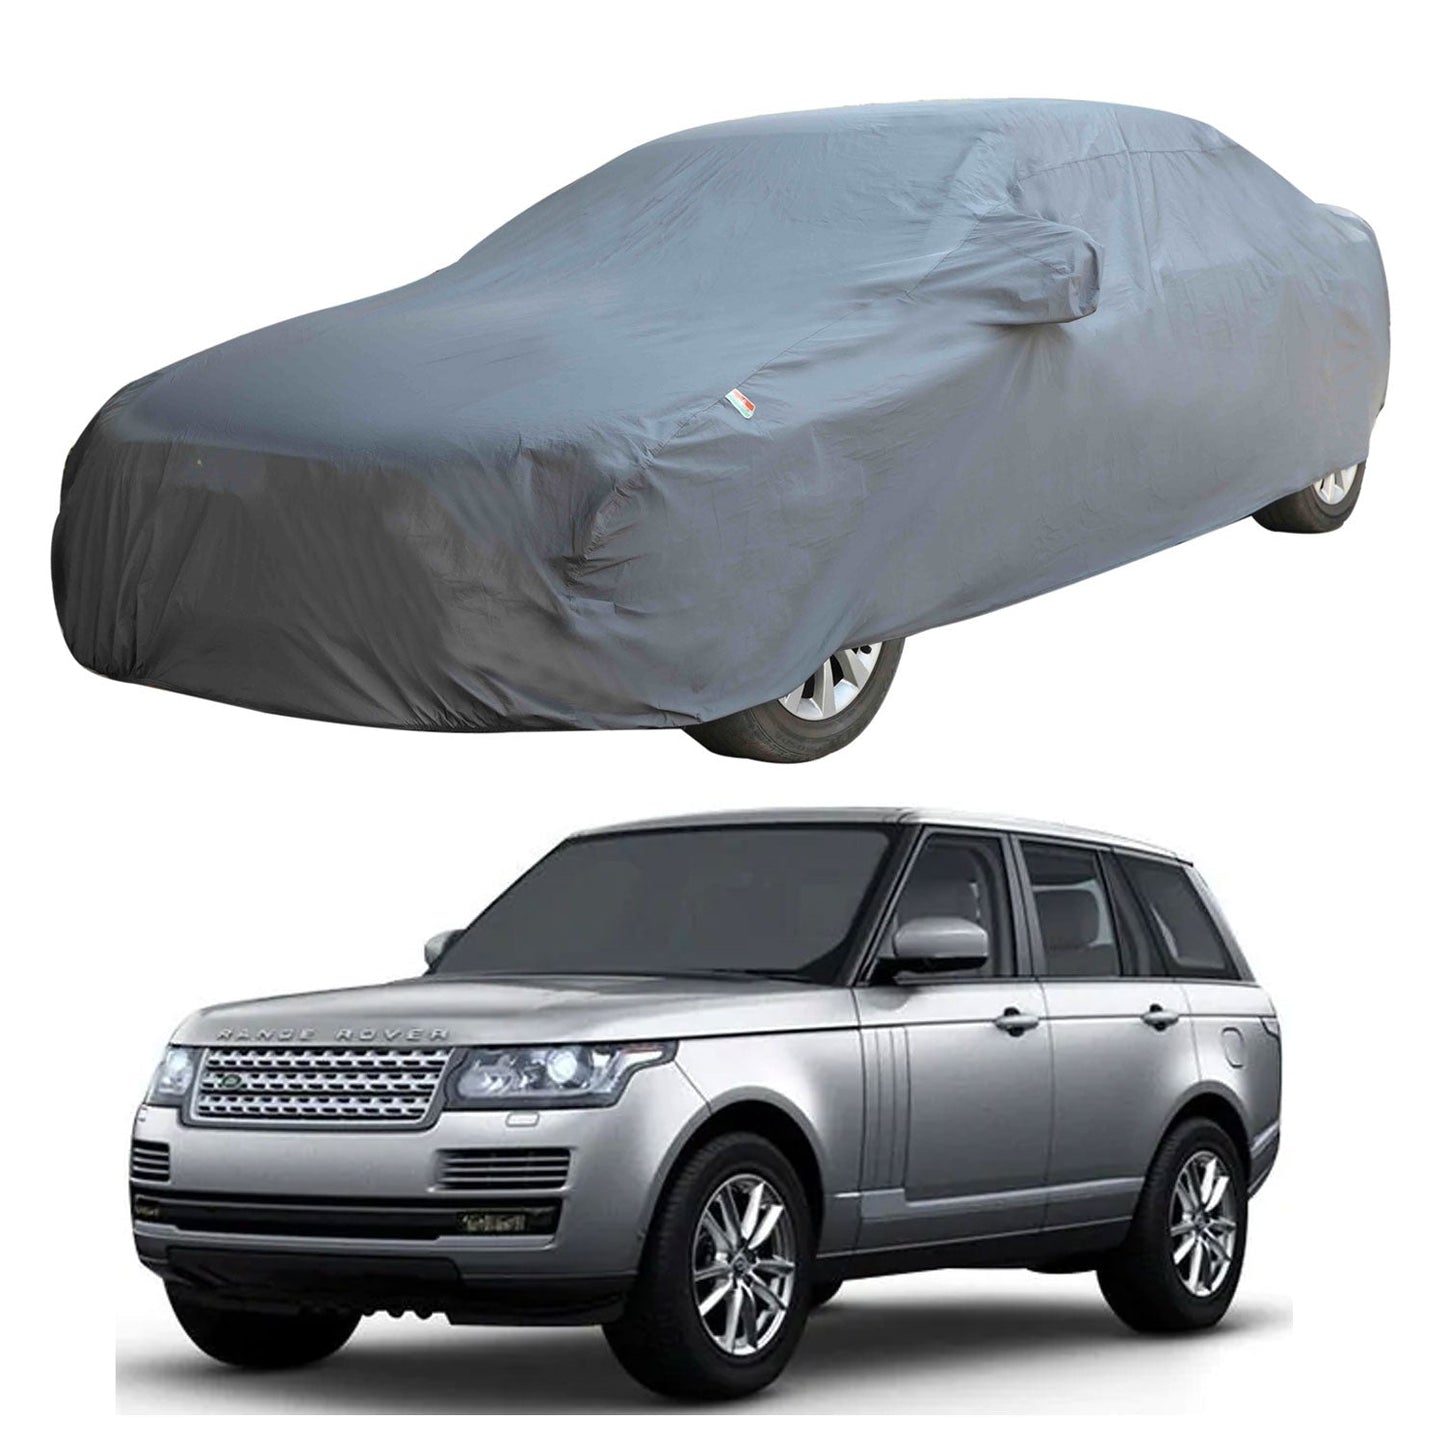 Oshotto Dark Grey 100% Anti Reflective, dustproof and Water Proof Car Body Cover with Mirror Pockets For Range Rover Autobiography